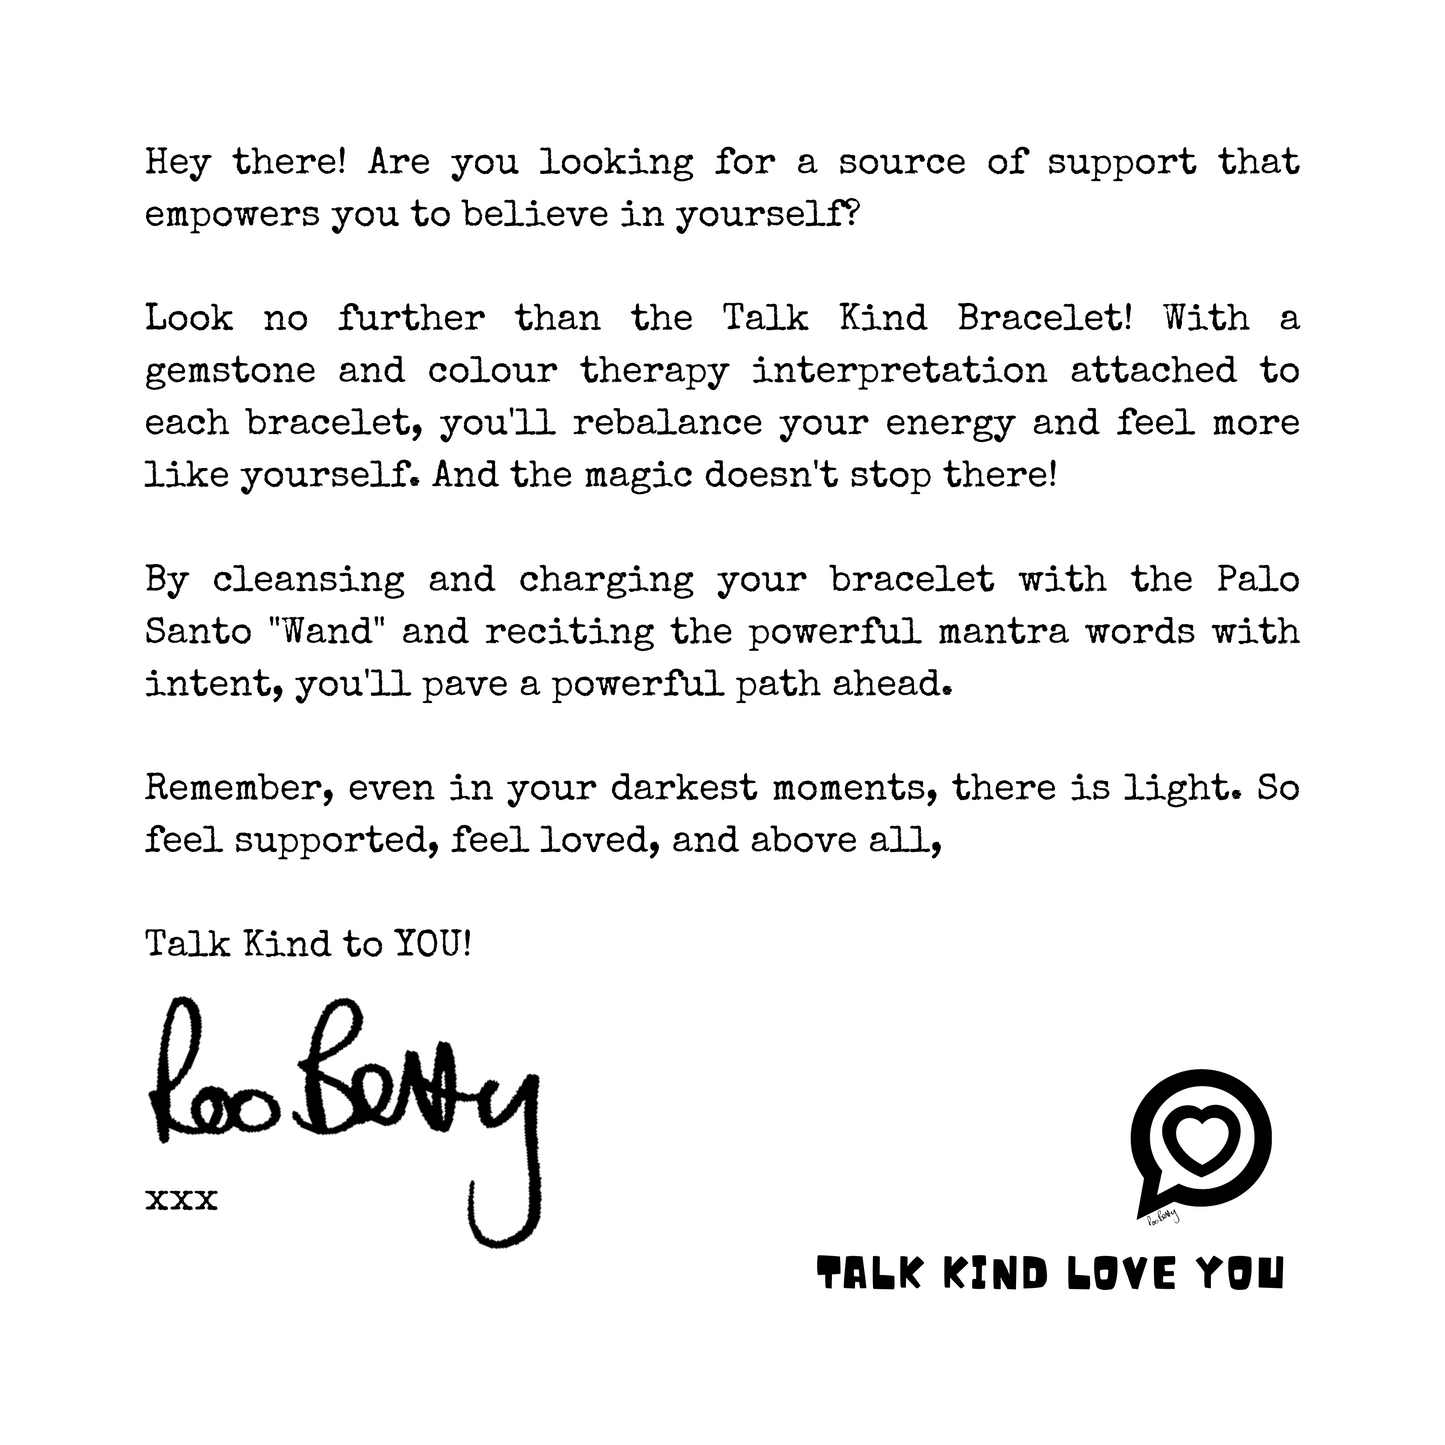 The Roo Betty Talk Kind Bracelet a message from Roo Betty